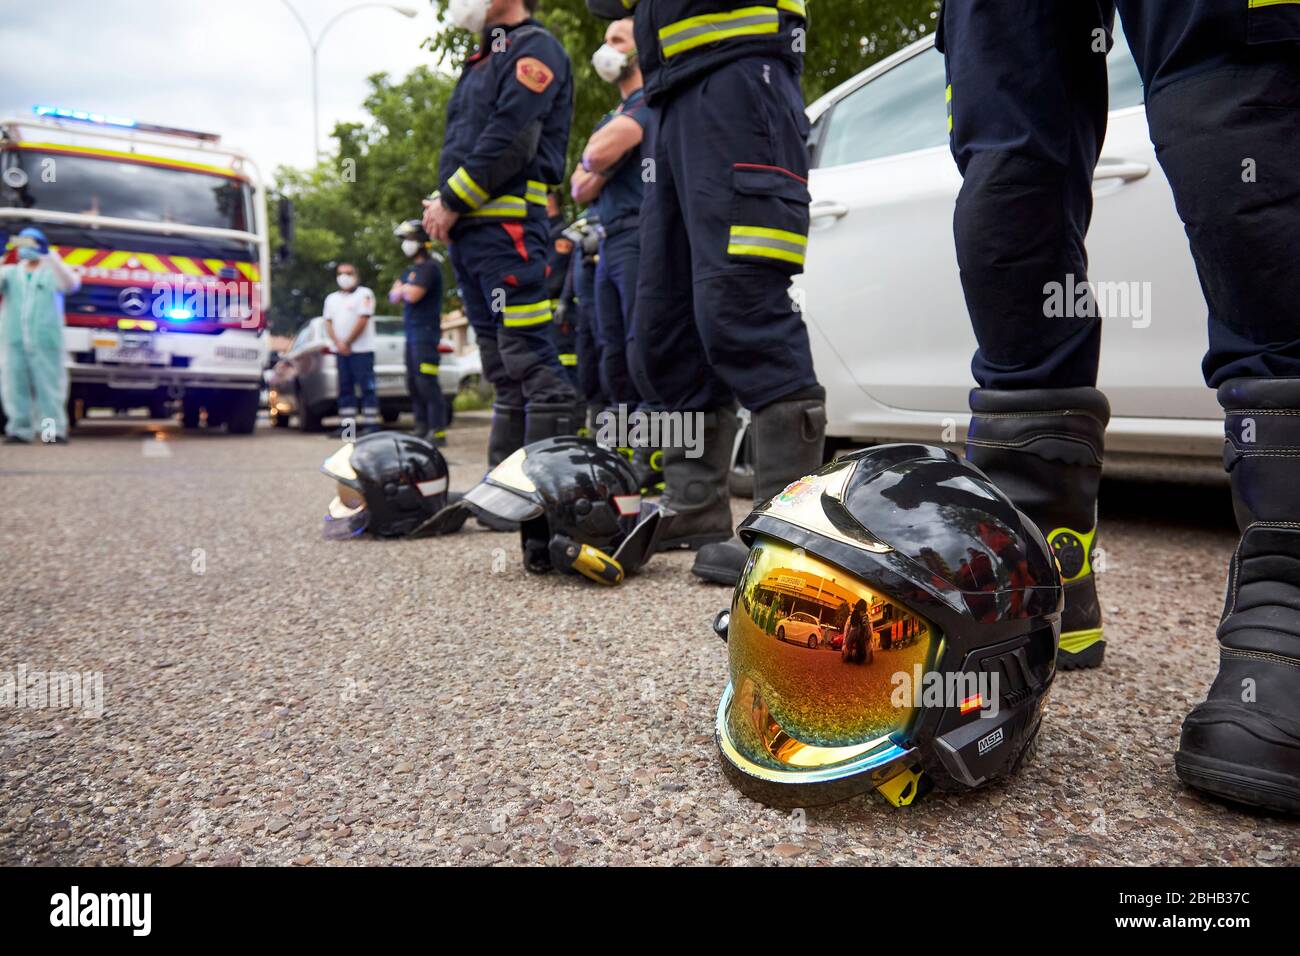 Firefighters in a moment of silence for the victims of the pandemic COVID19 during the applause.Since the start of the coronavirus outbreak and the state of alarm decreed by the Spanish government, people at 8pm as a tribute applaud the health personnel who return the applause from the different hospitals together with the police and members of civil protection. Stock Photo